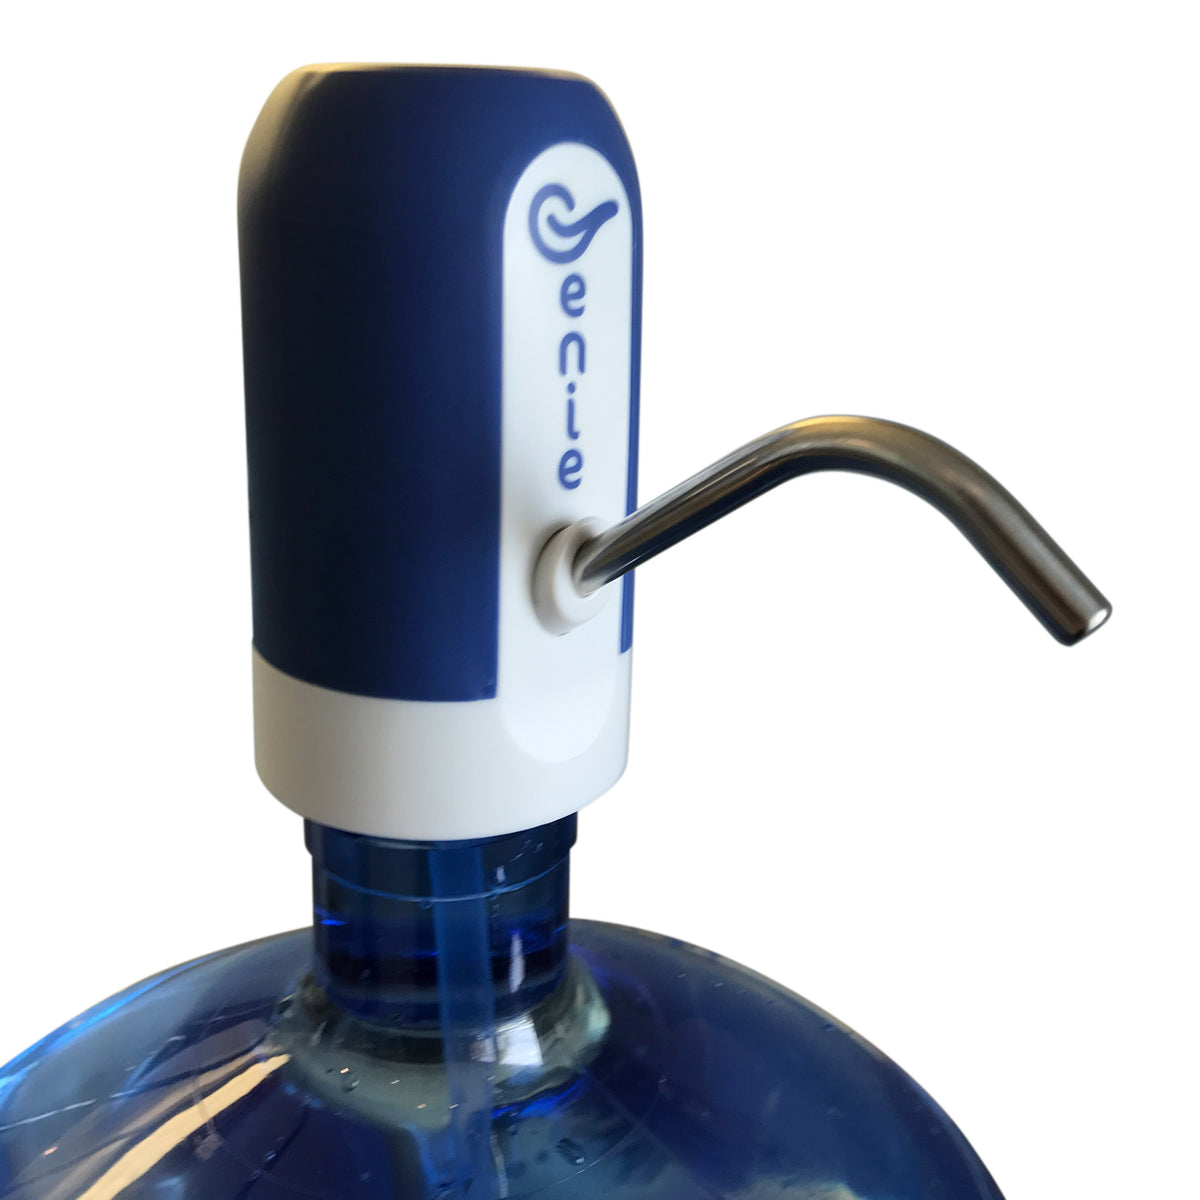 Genie Rechargeable Automatic Water Jug Pump on jug